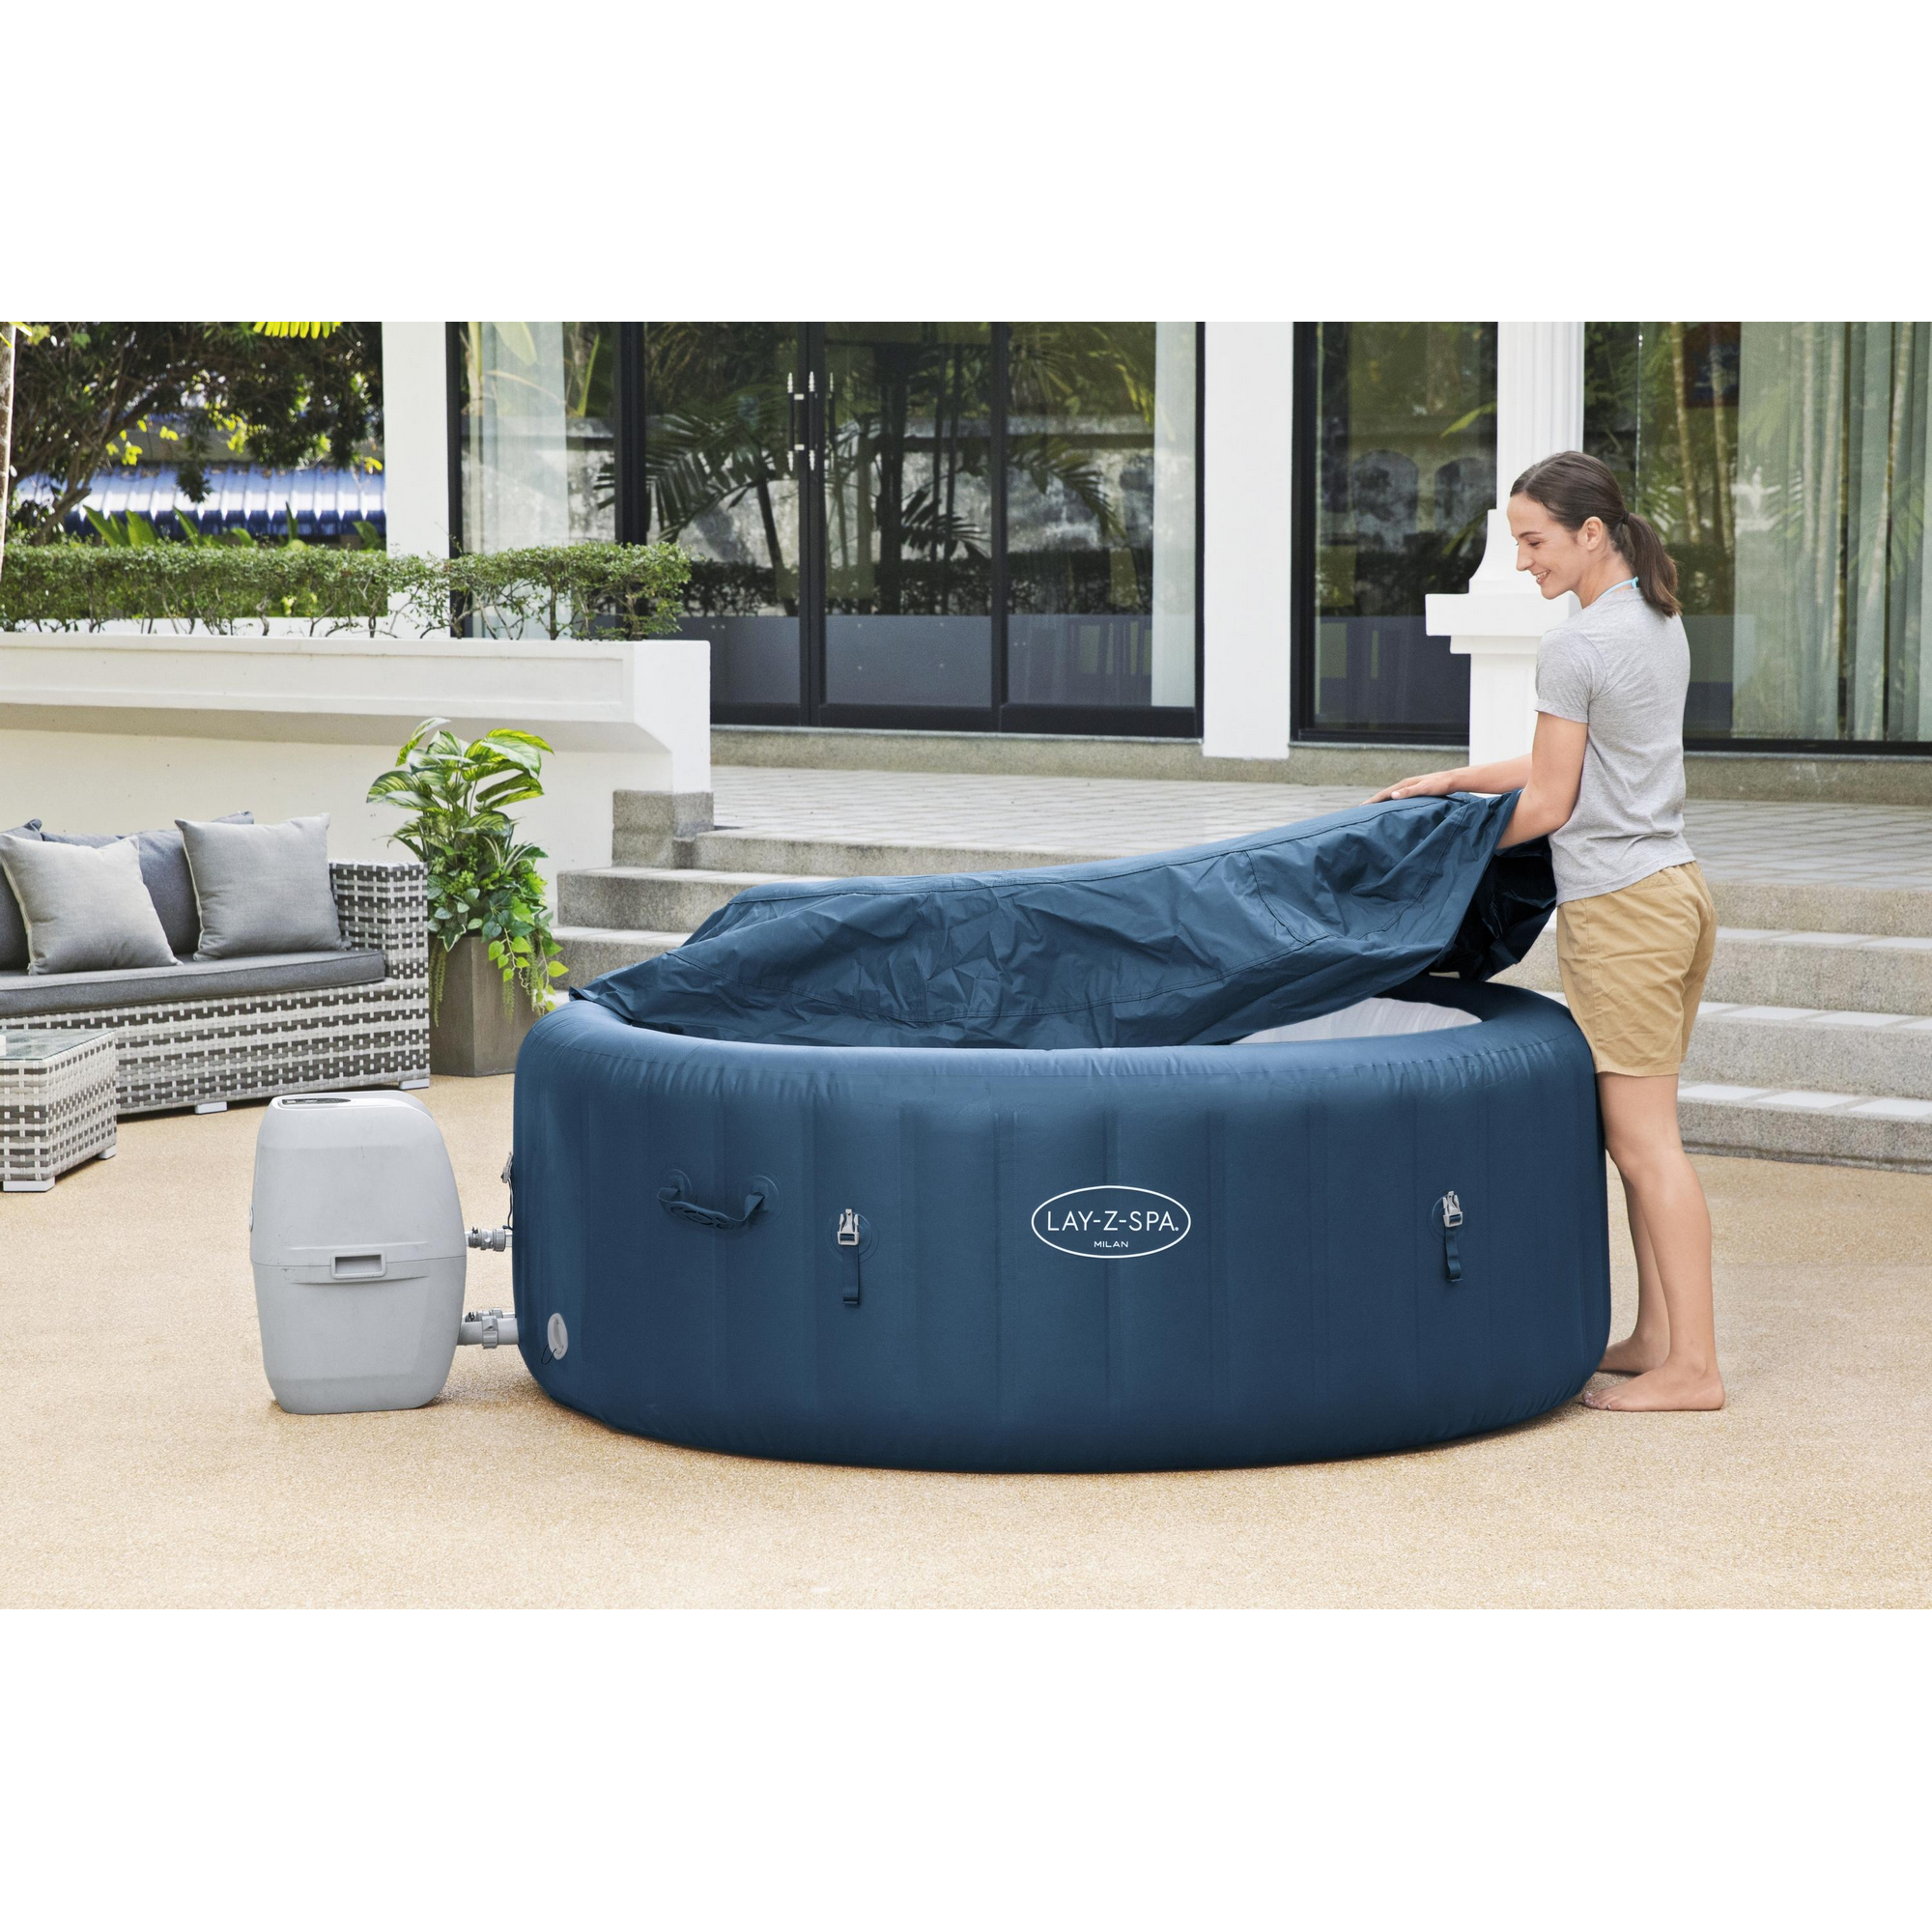 Whirlpool 'Lay-Z-Spa™ Milan AirJet Plus' blau/weiß 196 x 71 cm + product picture